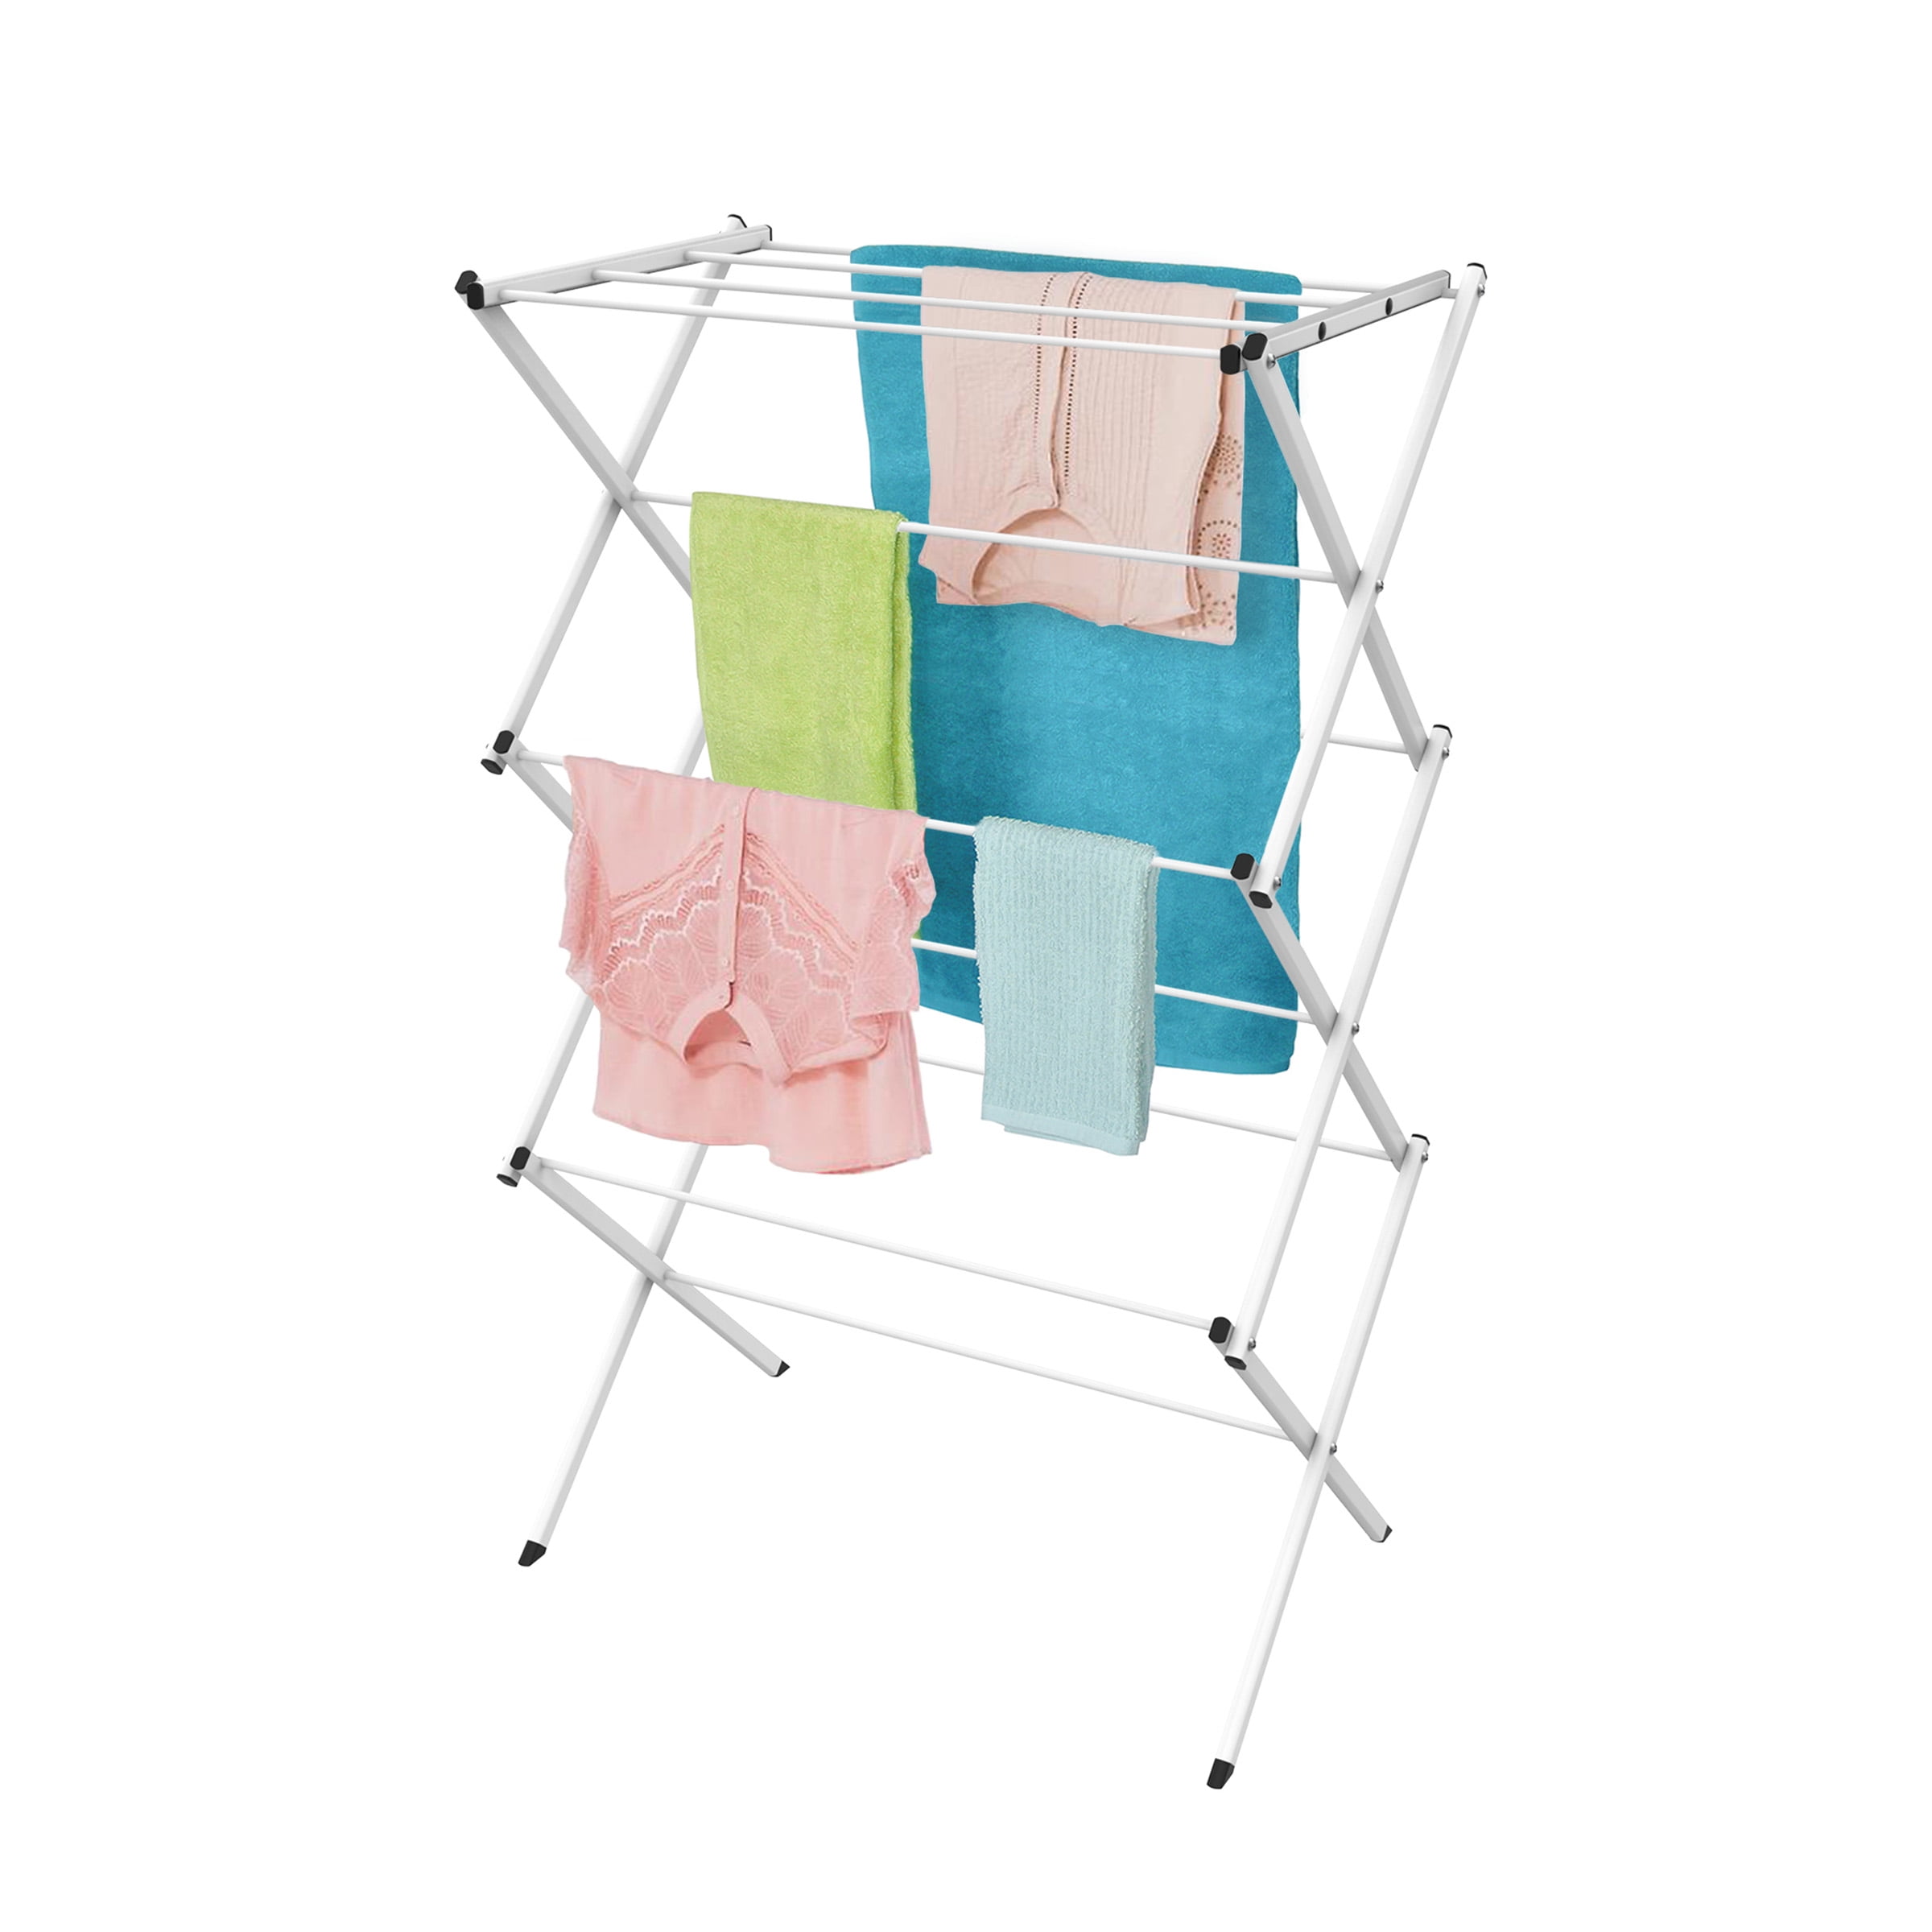 clothes drying rack kmart